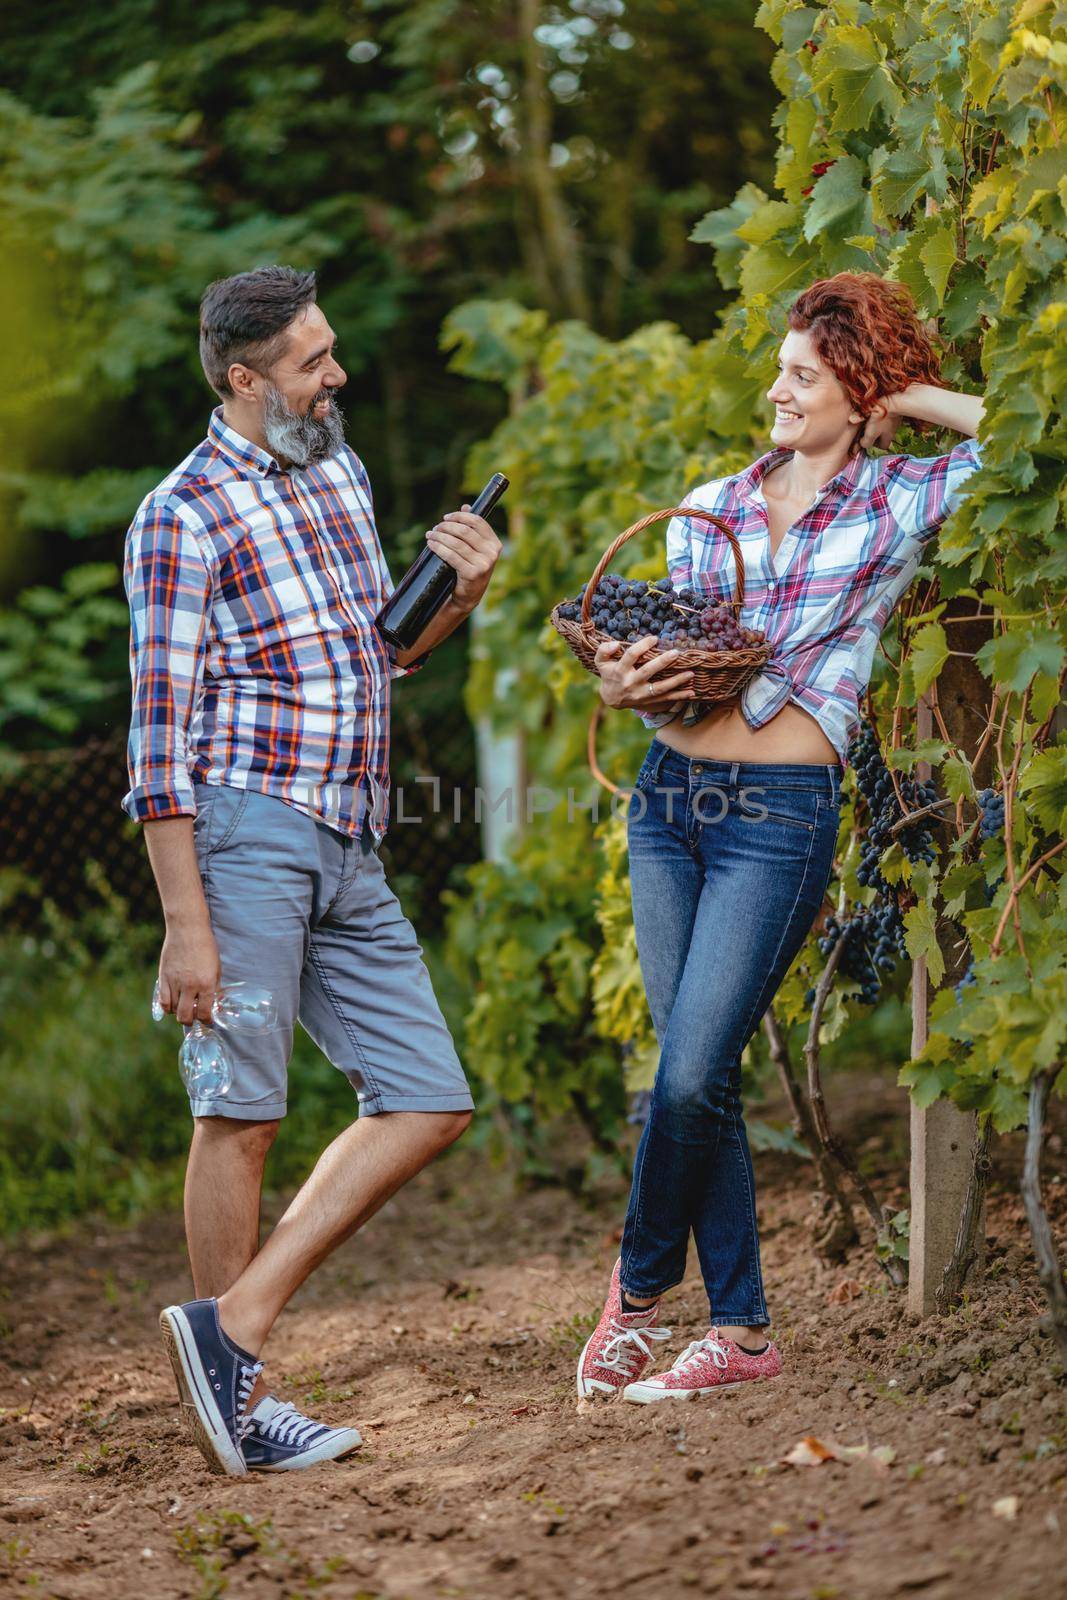 Beautiful smiling couple are having fun and tasting wine at a vineyard. A man is holding a bottle of wine and a woman is holding basket with grapes.